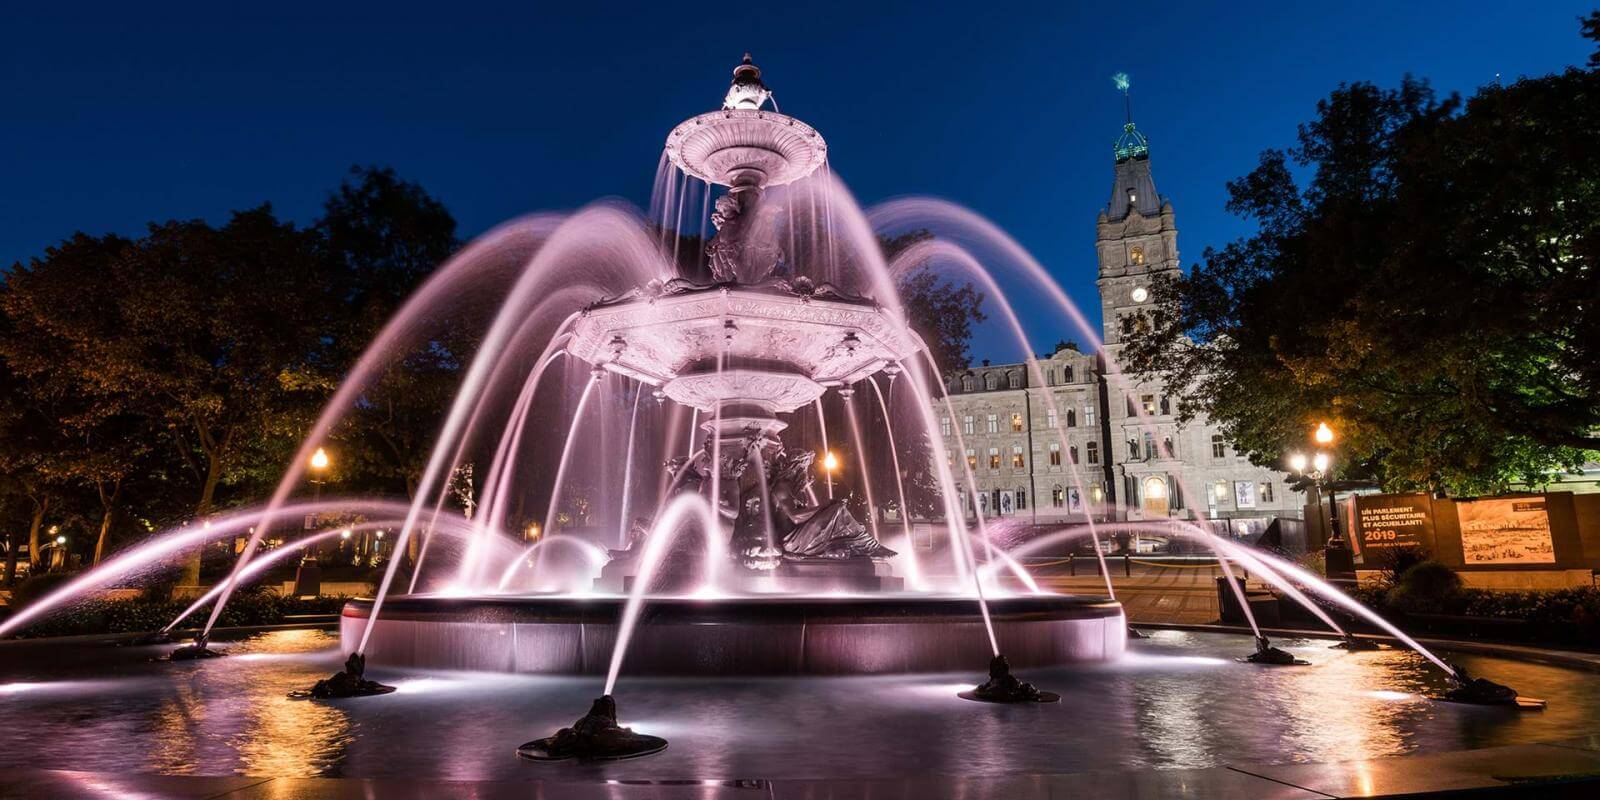 View of the Tourny Fountain illuminated in the evening and the Parliament Building in the background.